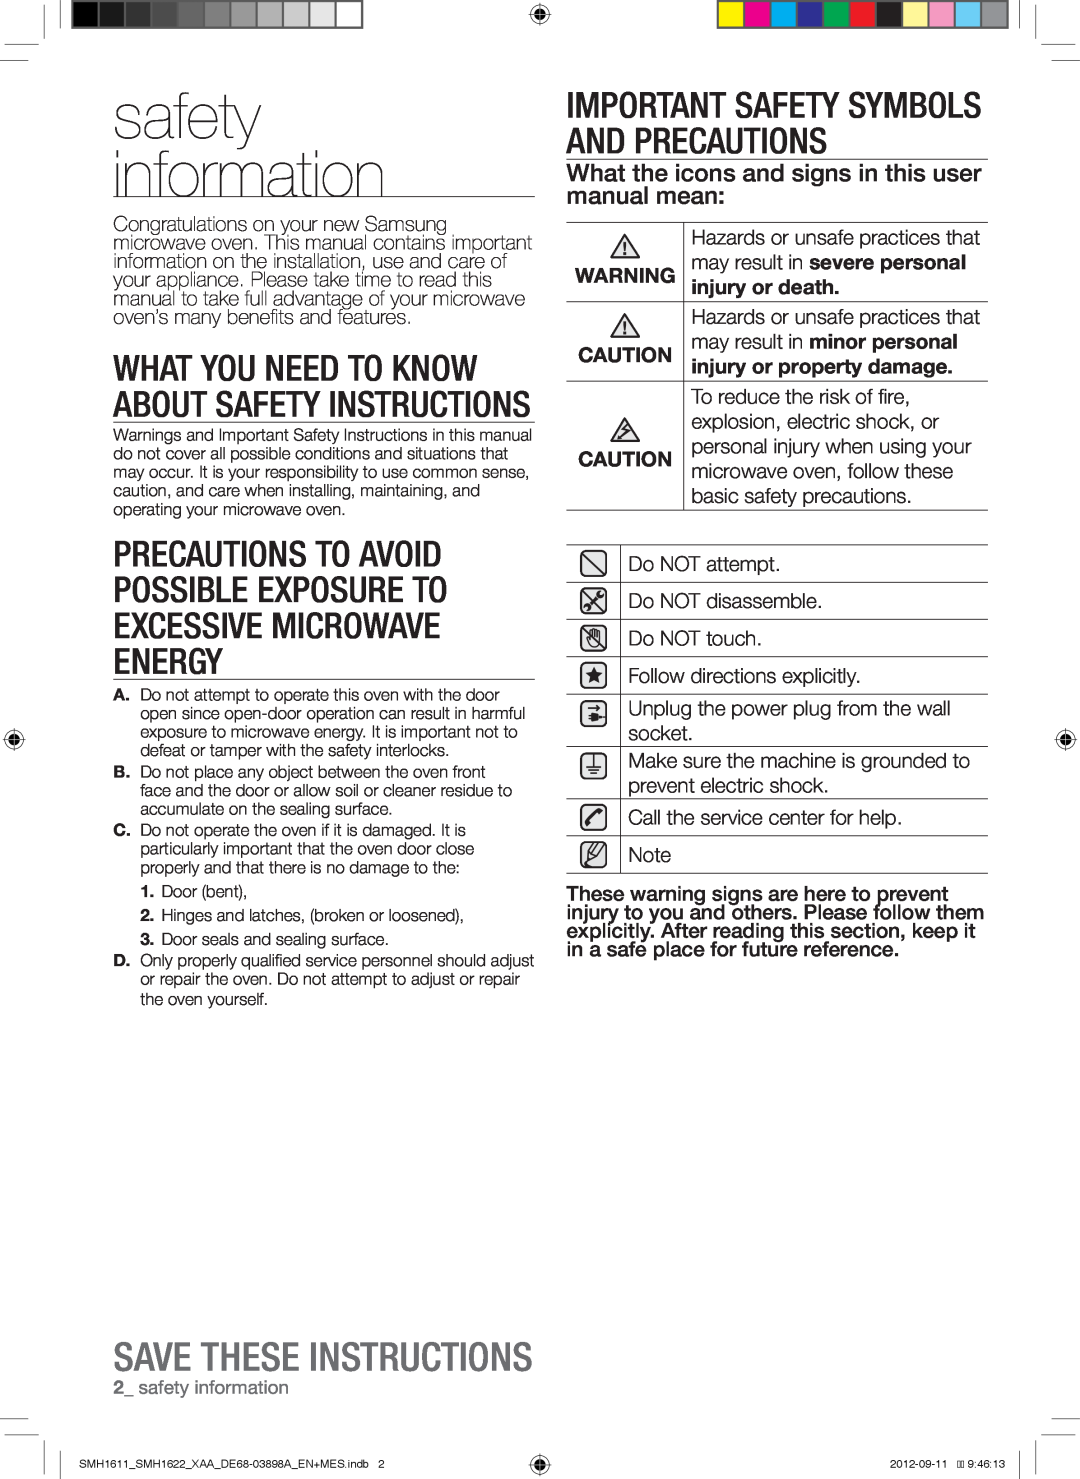 Samsung SMH1611, SMH1622S safety information, Important Safety Symbols And Precautions, may result in severe personal 